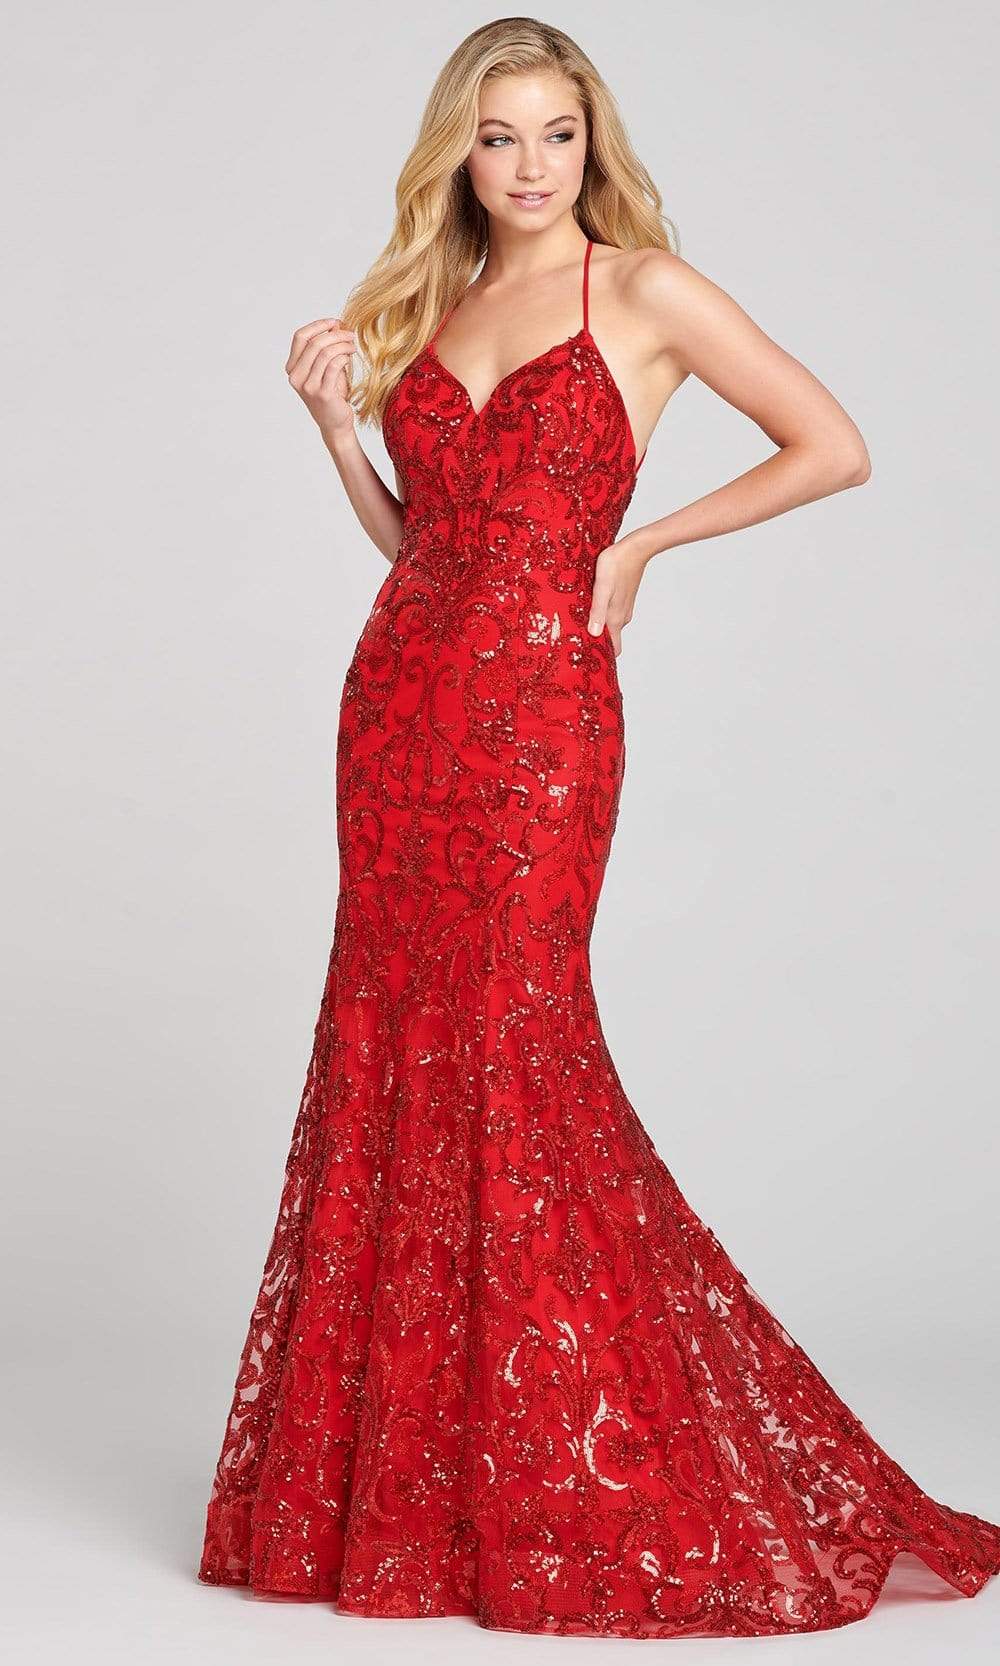 Colette for Mon Cheri - CL12130 Spaghetti Strap Sequined Mermaid Gown Evening Dresses 00 / Valentine Red